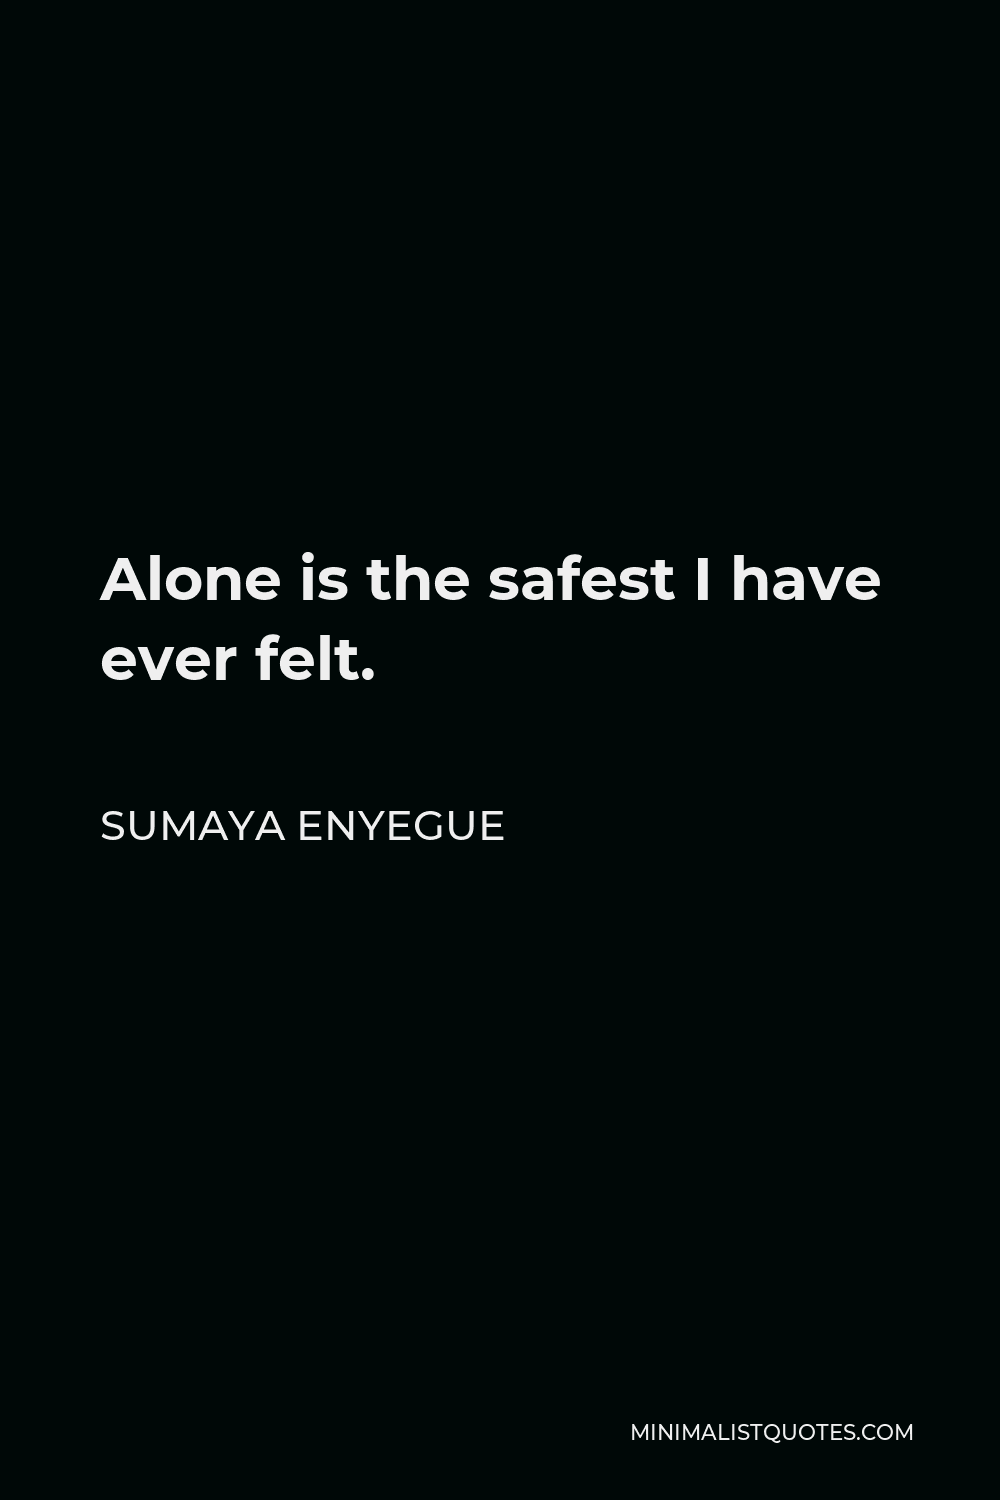 Sumaya Enyegue Quote - Alone is the safest I have ever felt.